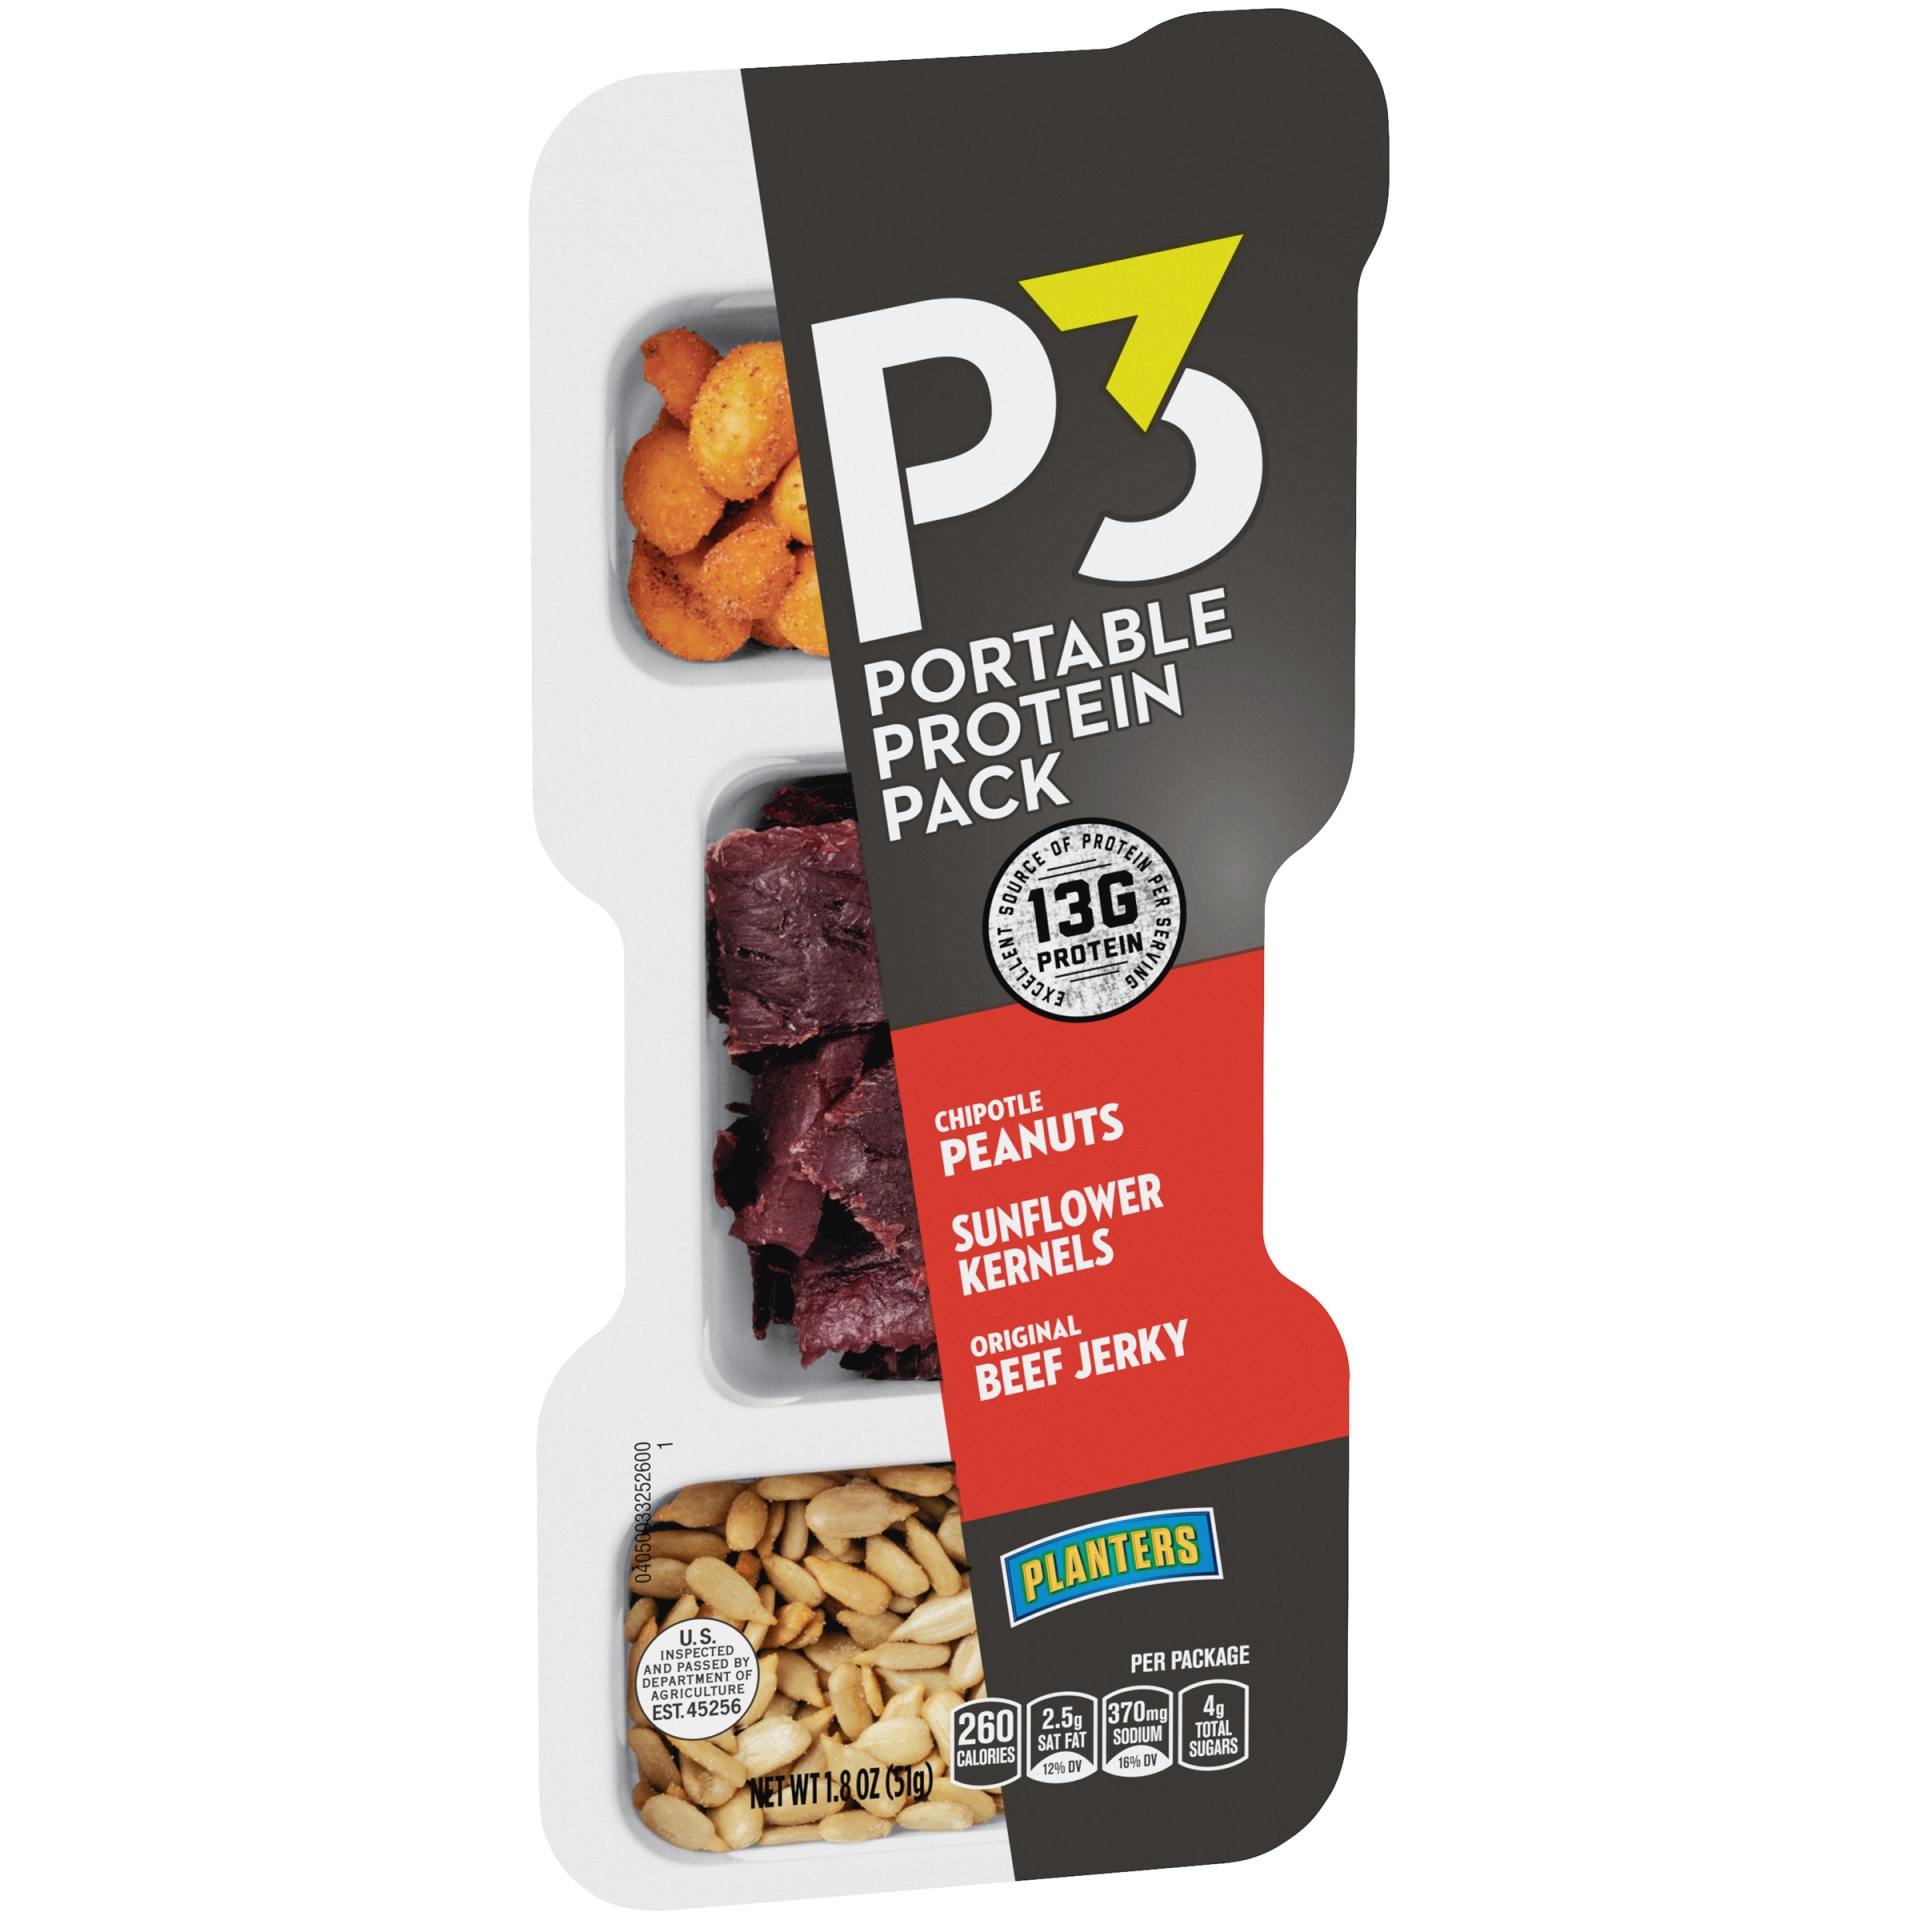 slide 3 of 7, P3 Portable Protein Snack Pack with Chipotle Peanuts, Sunflower Kernels & Original Beef Jerky Tray, 1.8 oz